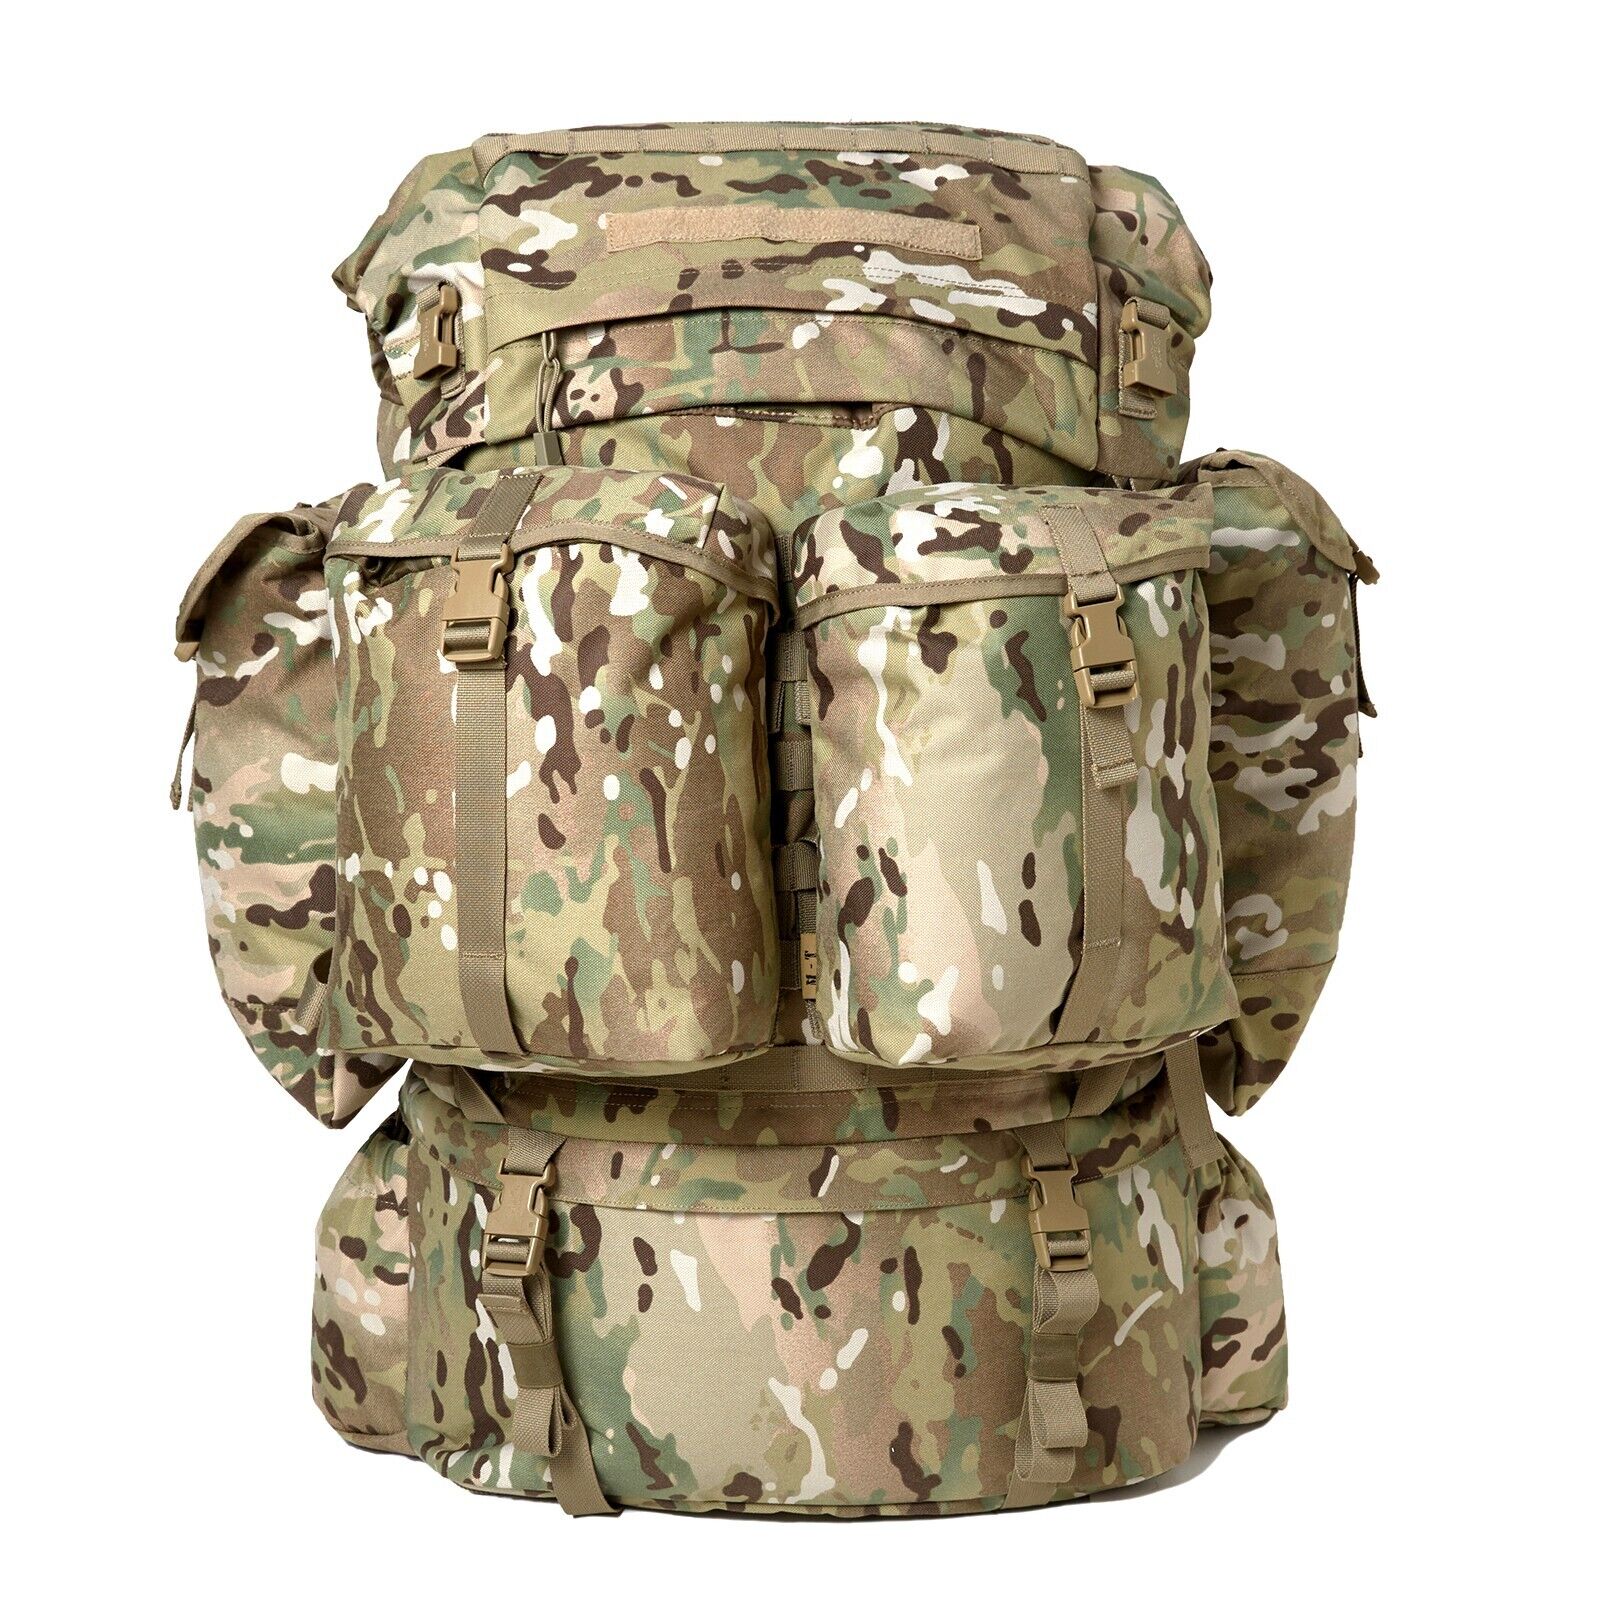 MT Assembly Military FILBE Rucksack Tactical Assault Backpack Main Pack Multicam